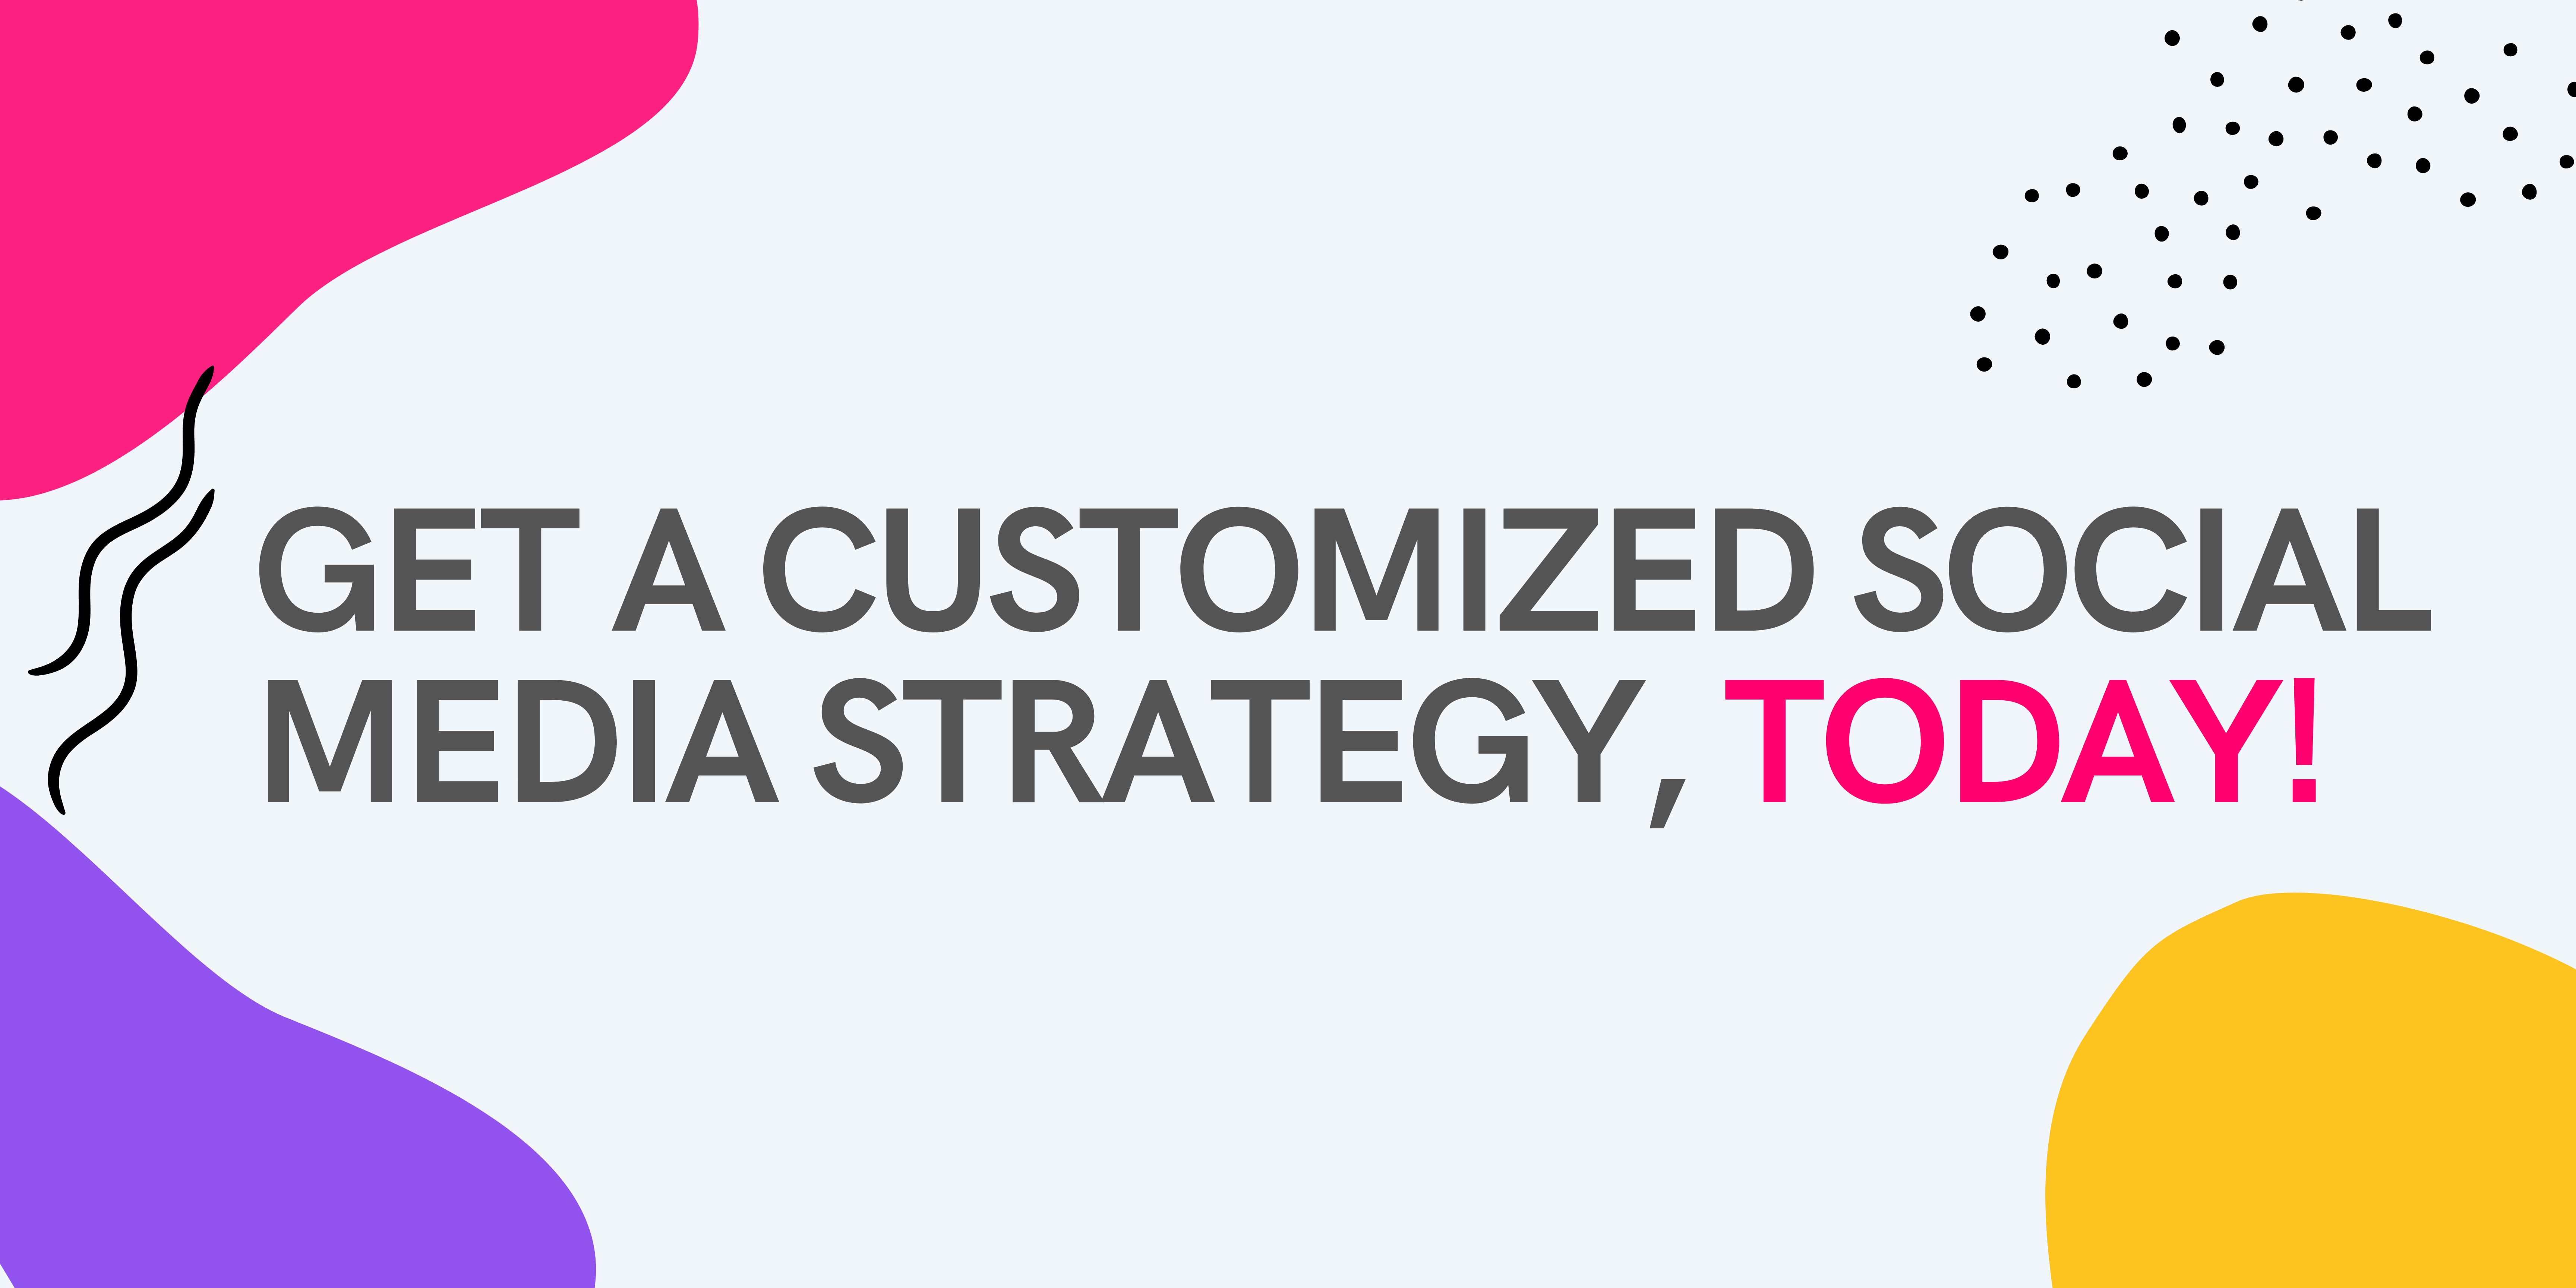 Get a customize social media strategy, today! 